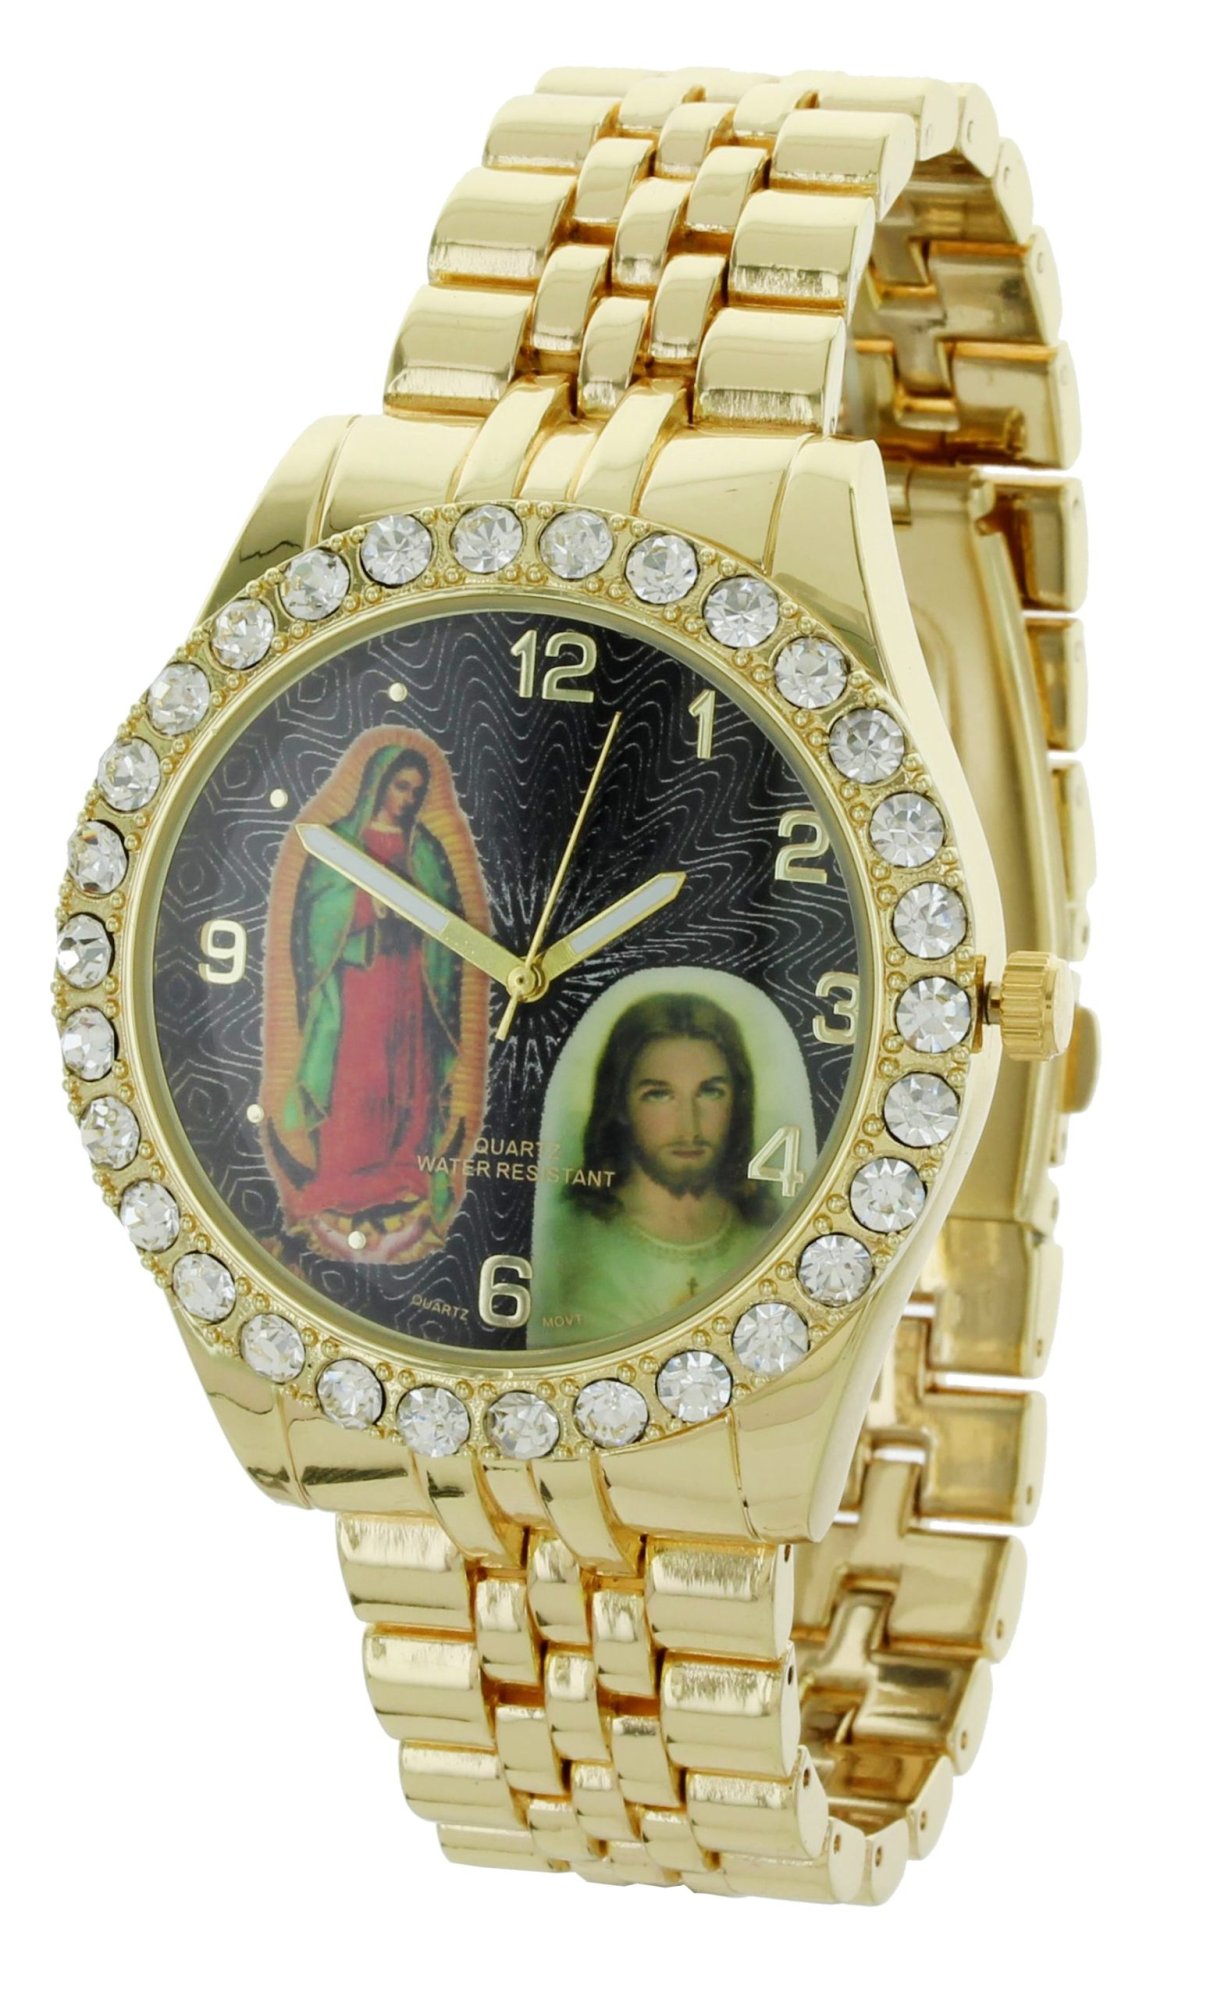 Model: Our Lady of Guadalupe and Jesus Gold-Tone Metal Bracelet Watch with Neckless and Cross Pendent Set